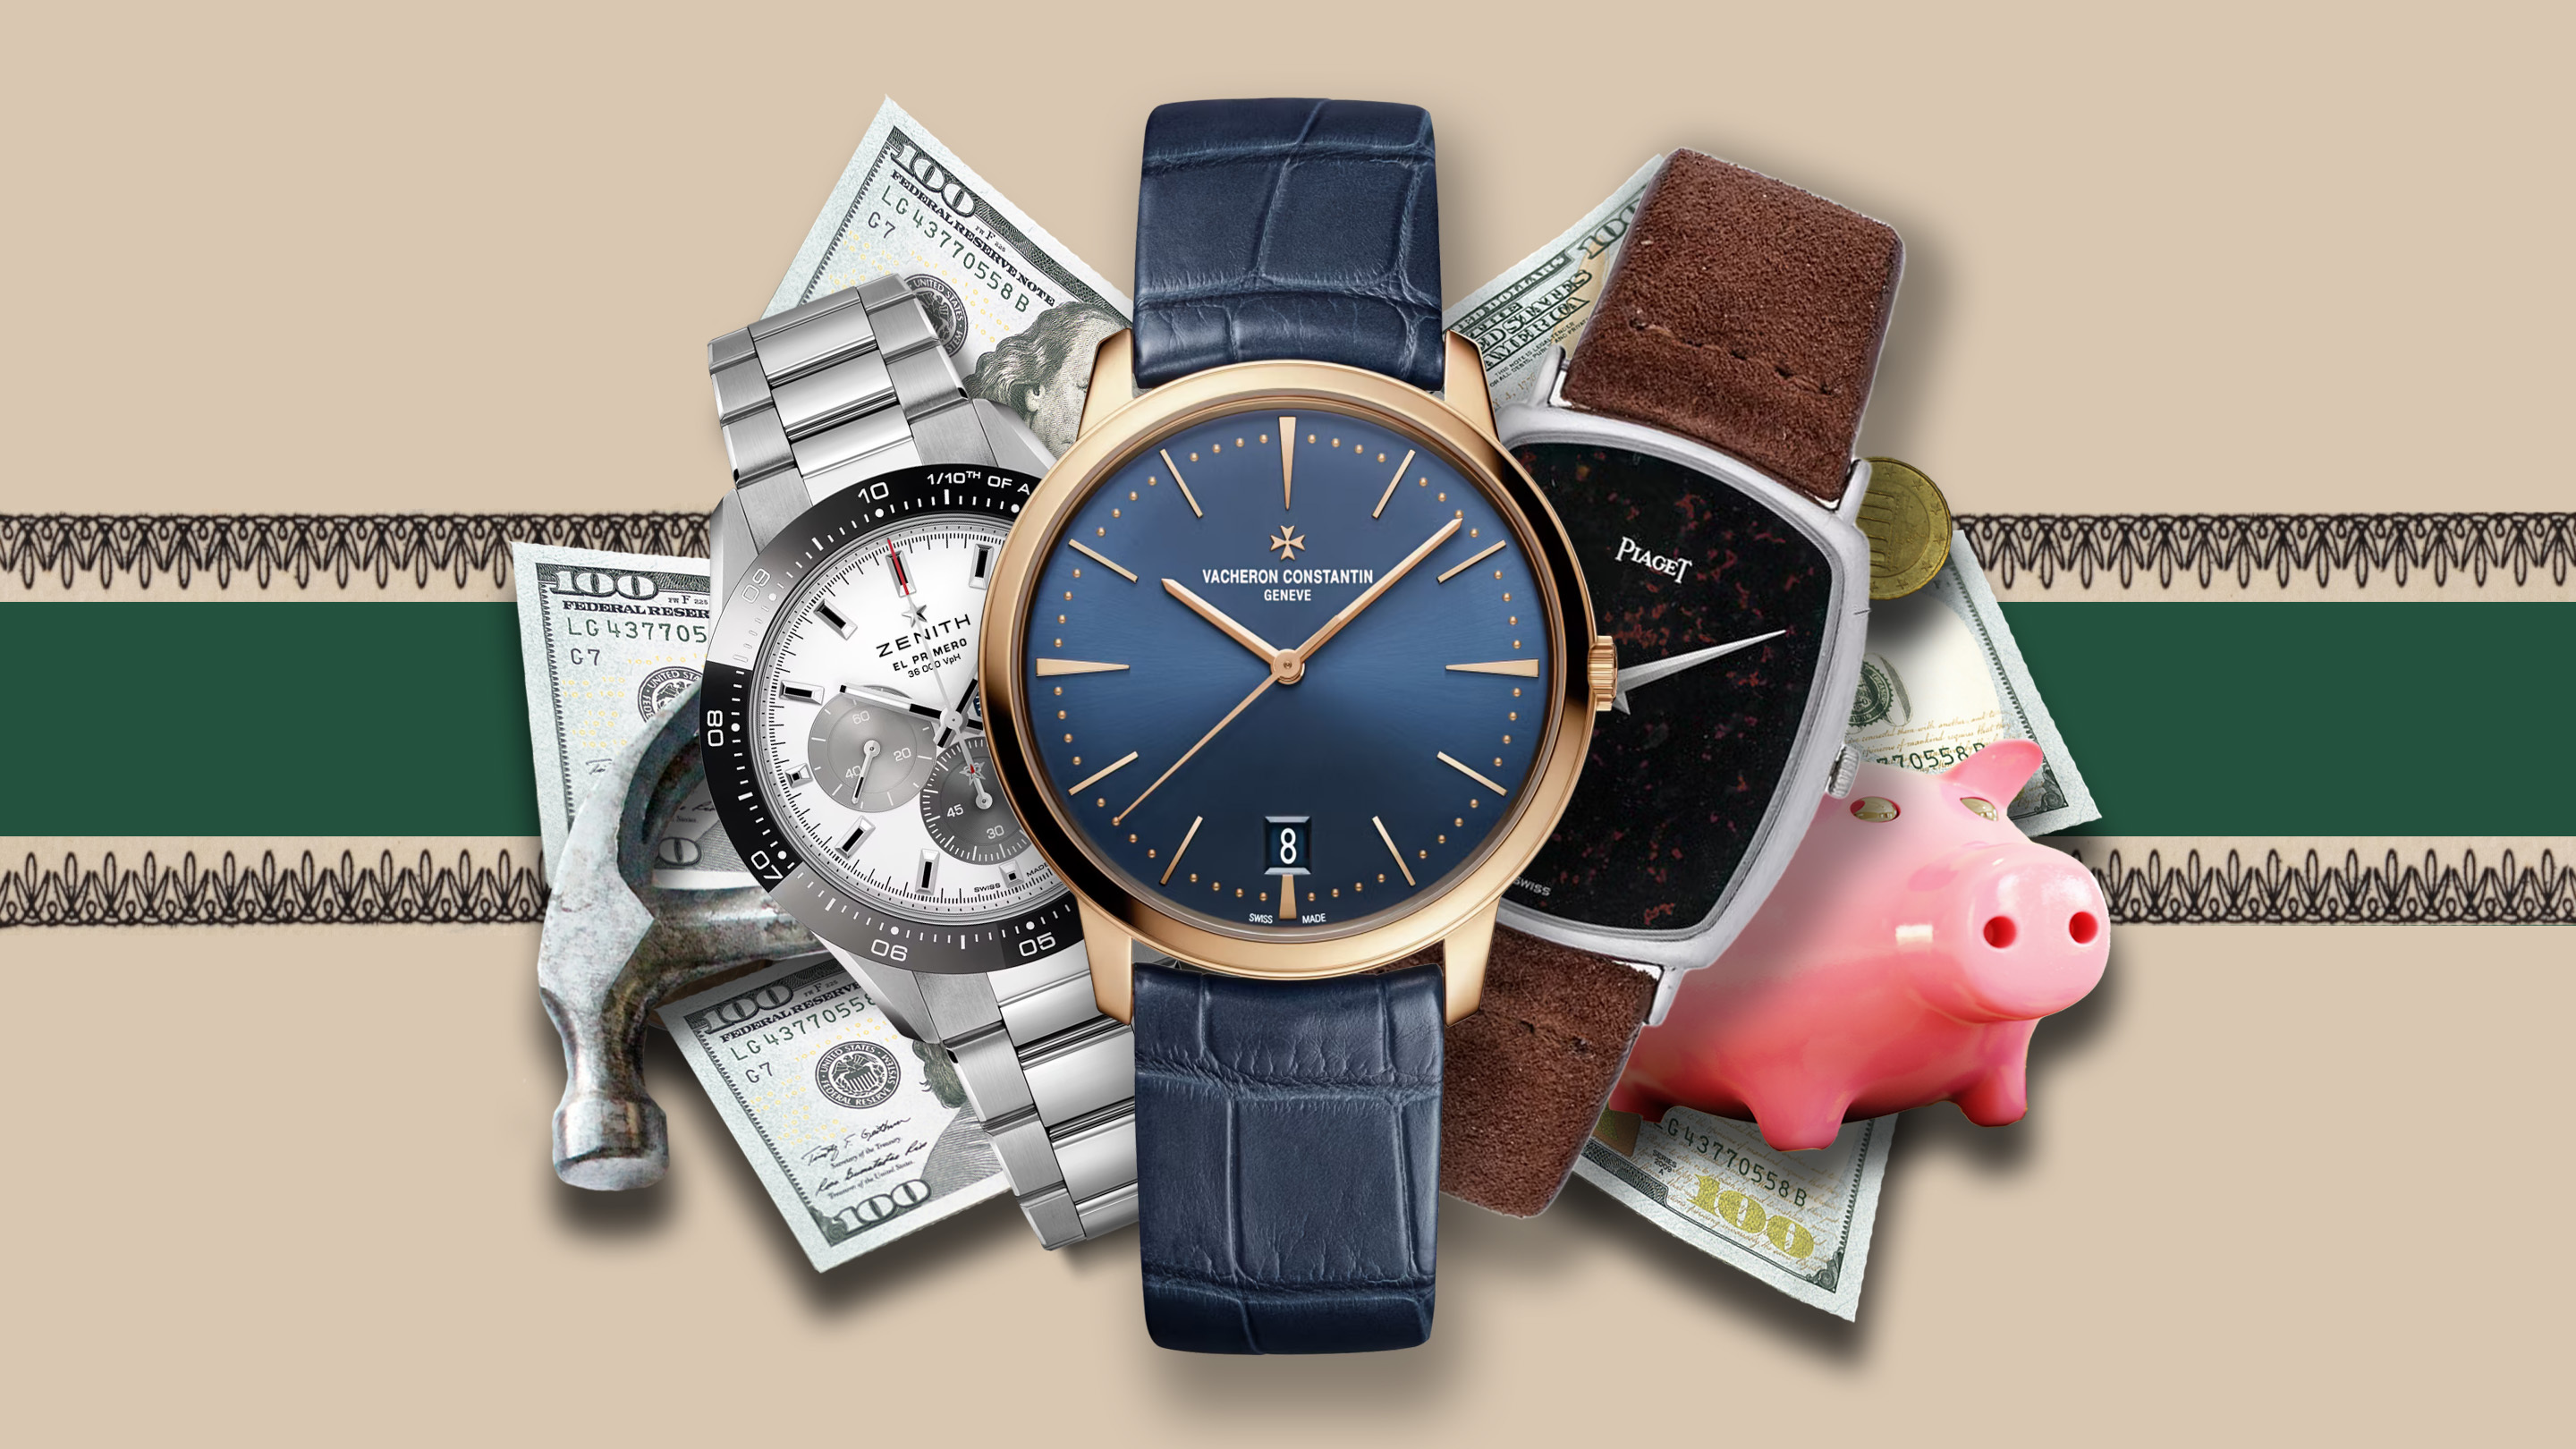 The Best Watches You Can Find For UNDER $100 - YouTube